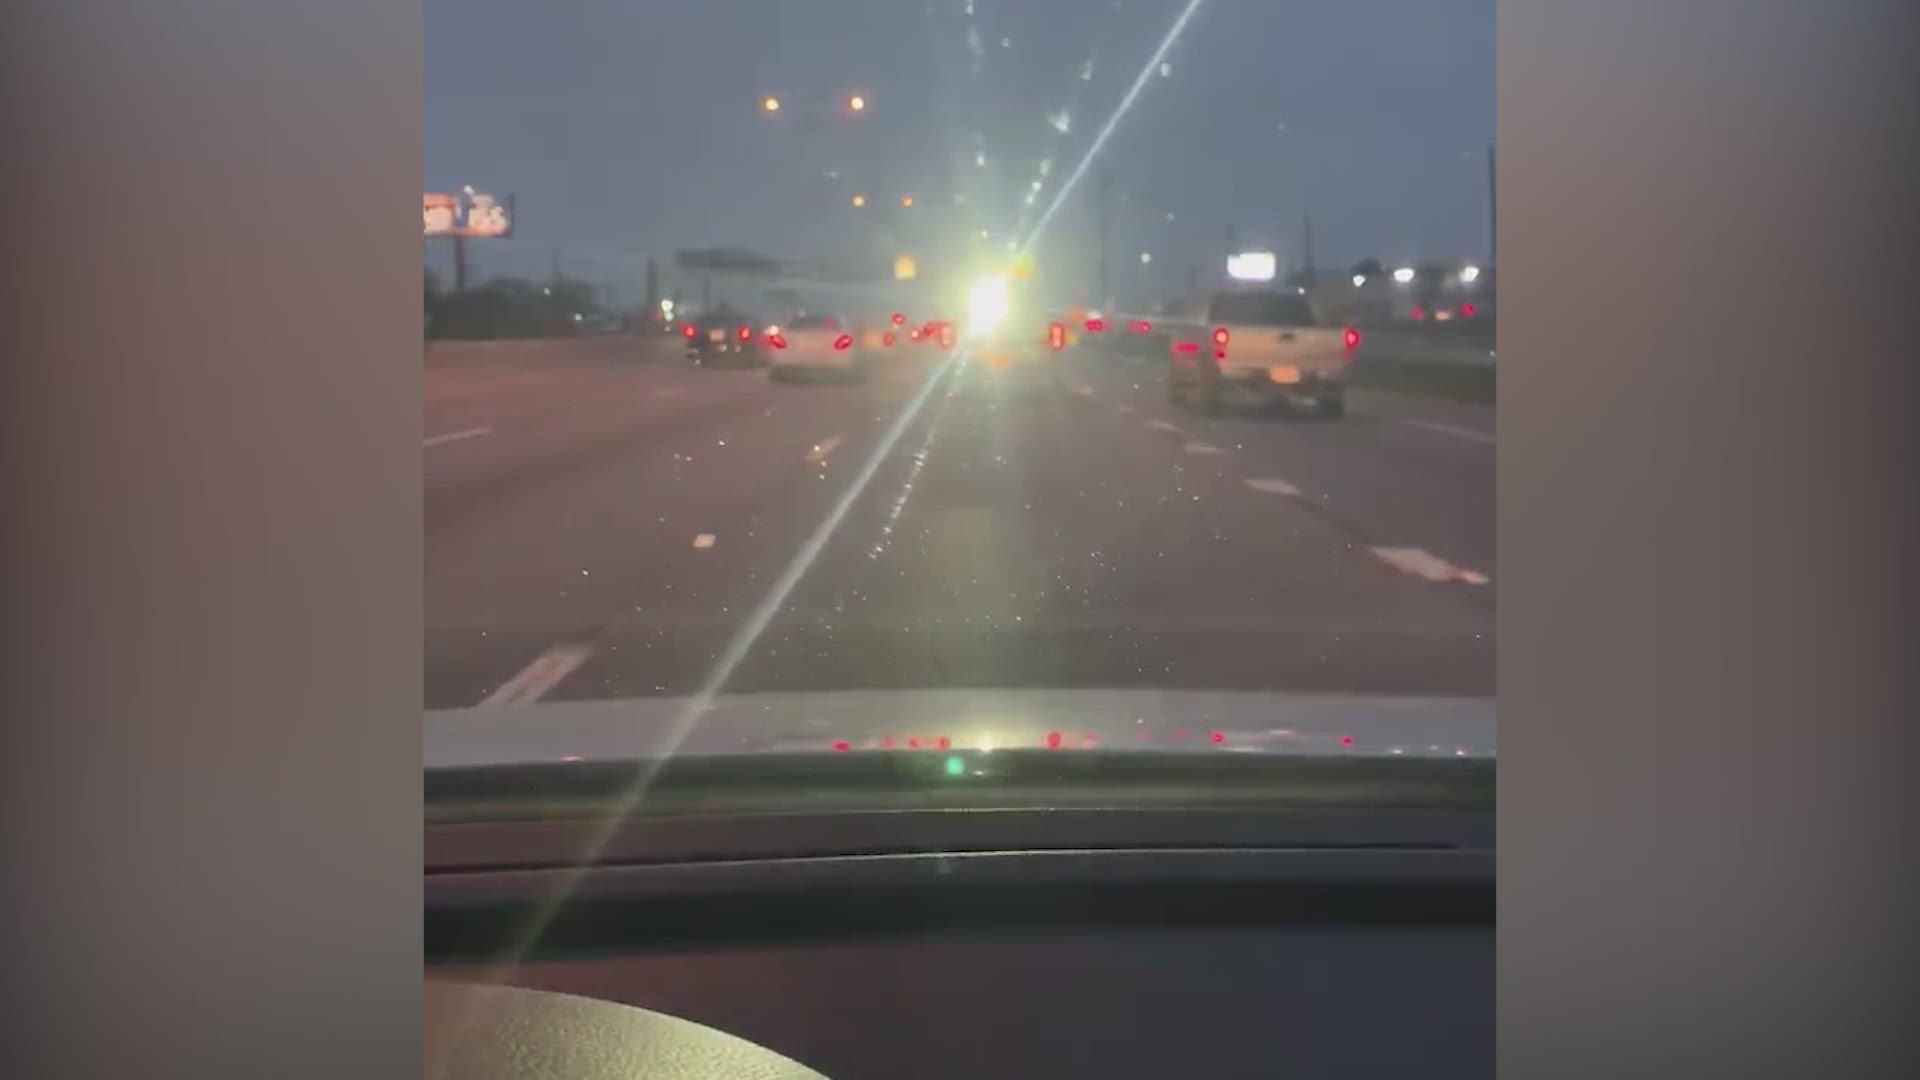 Man says road rage caused bright light to come from driver's truck.